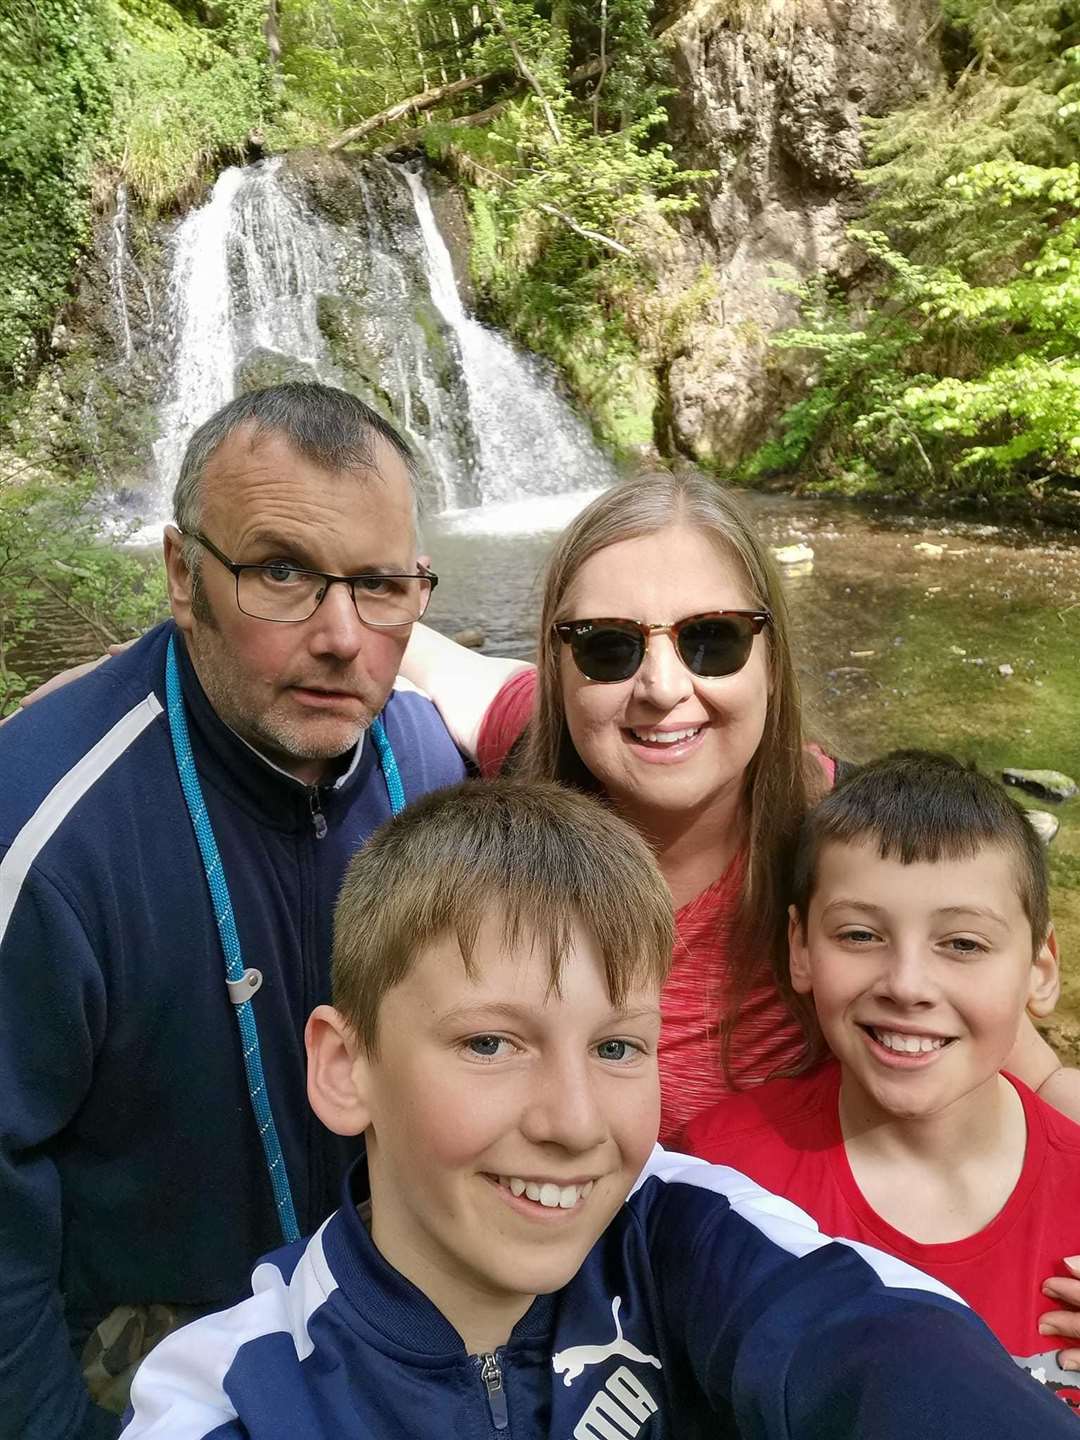 Gavin and Lindsay Brown with their sons Ben (12) and Lucas (9) at the Fairy Glan during one of their walks as part of their bit to walk 100 miles in May to raise funds for Melanoma UK.